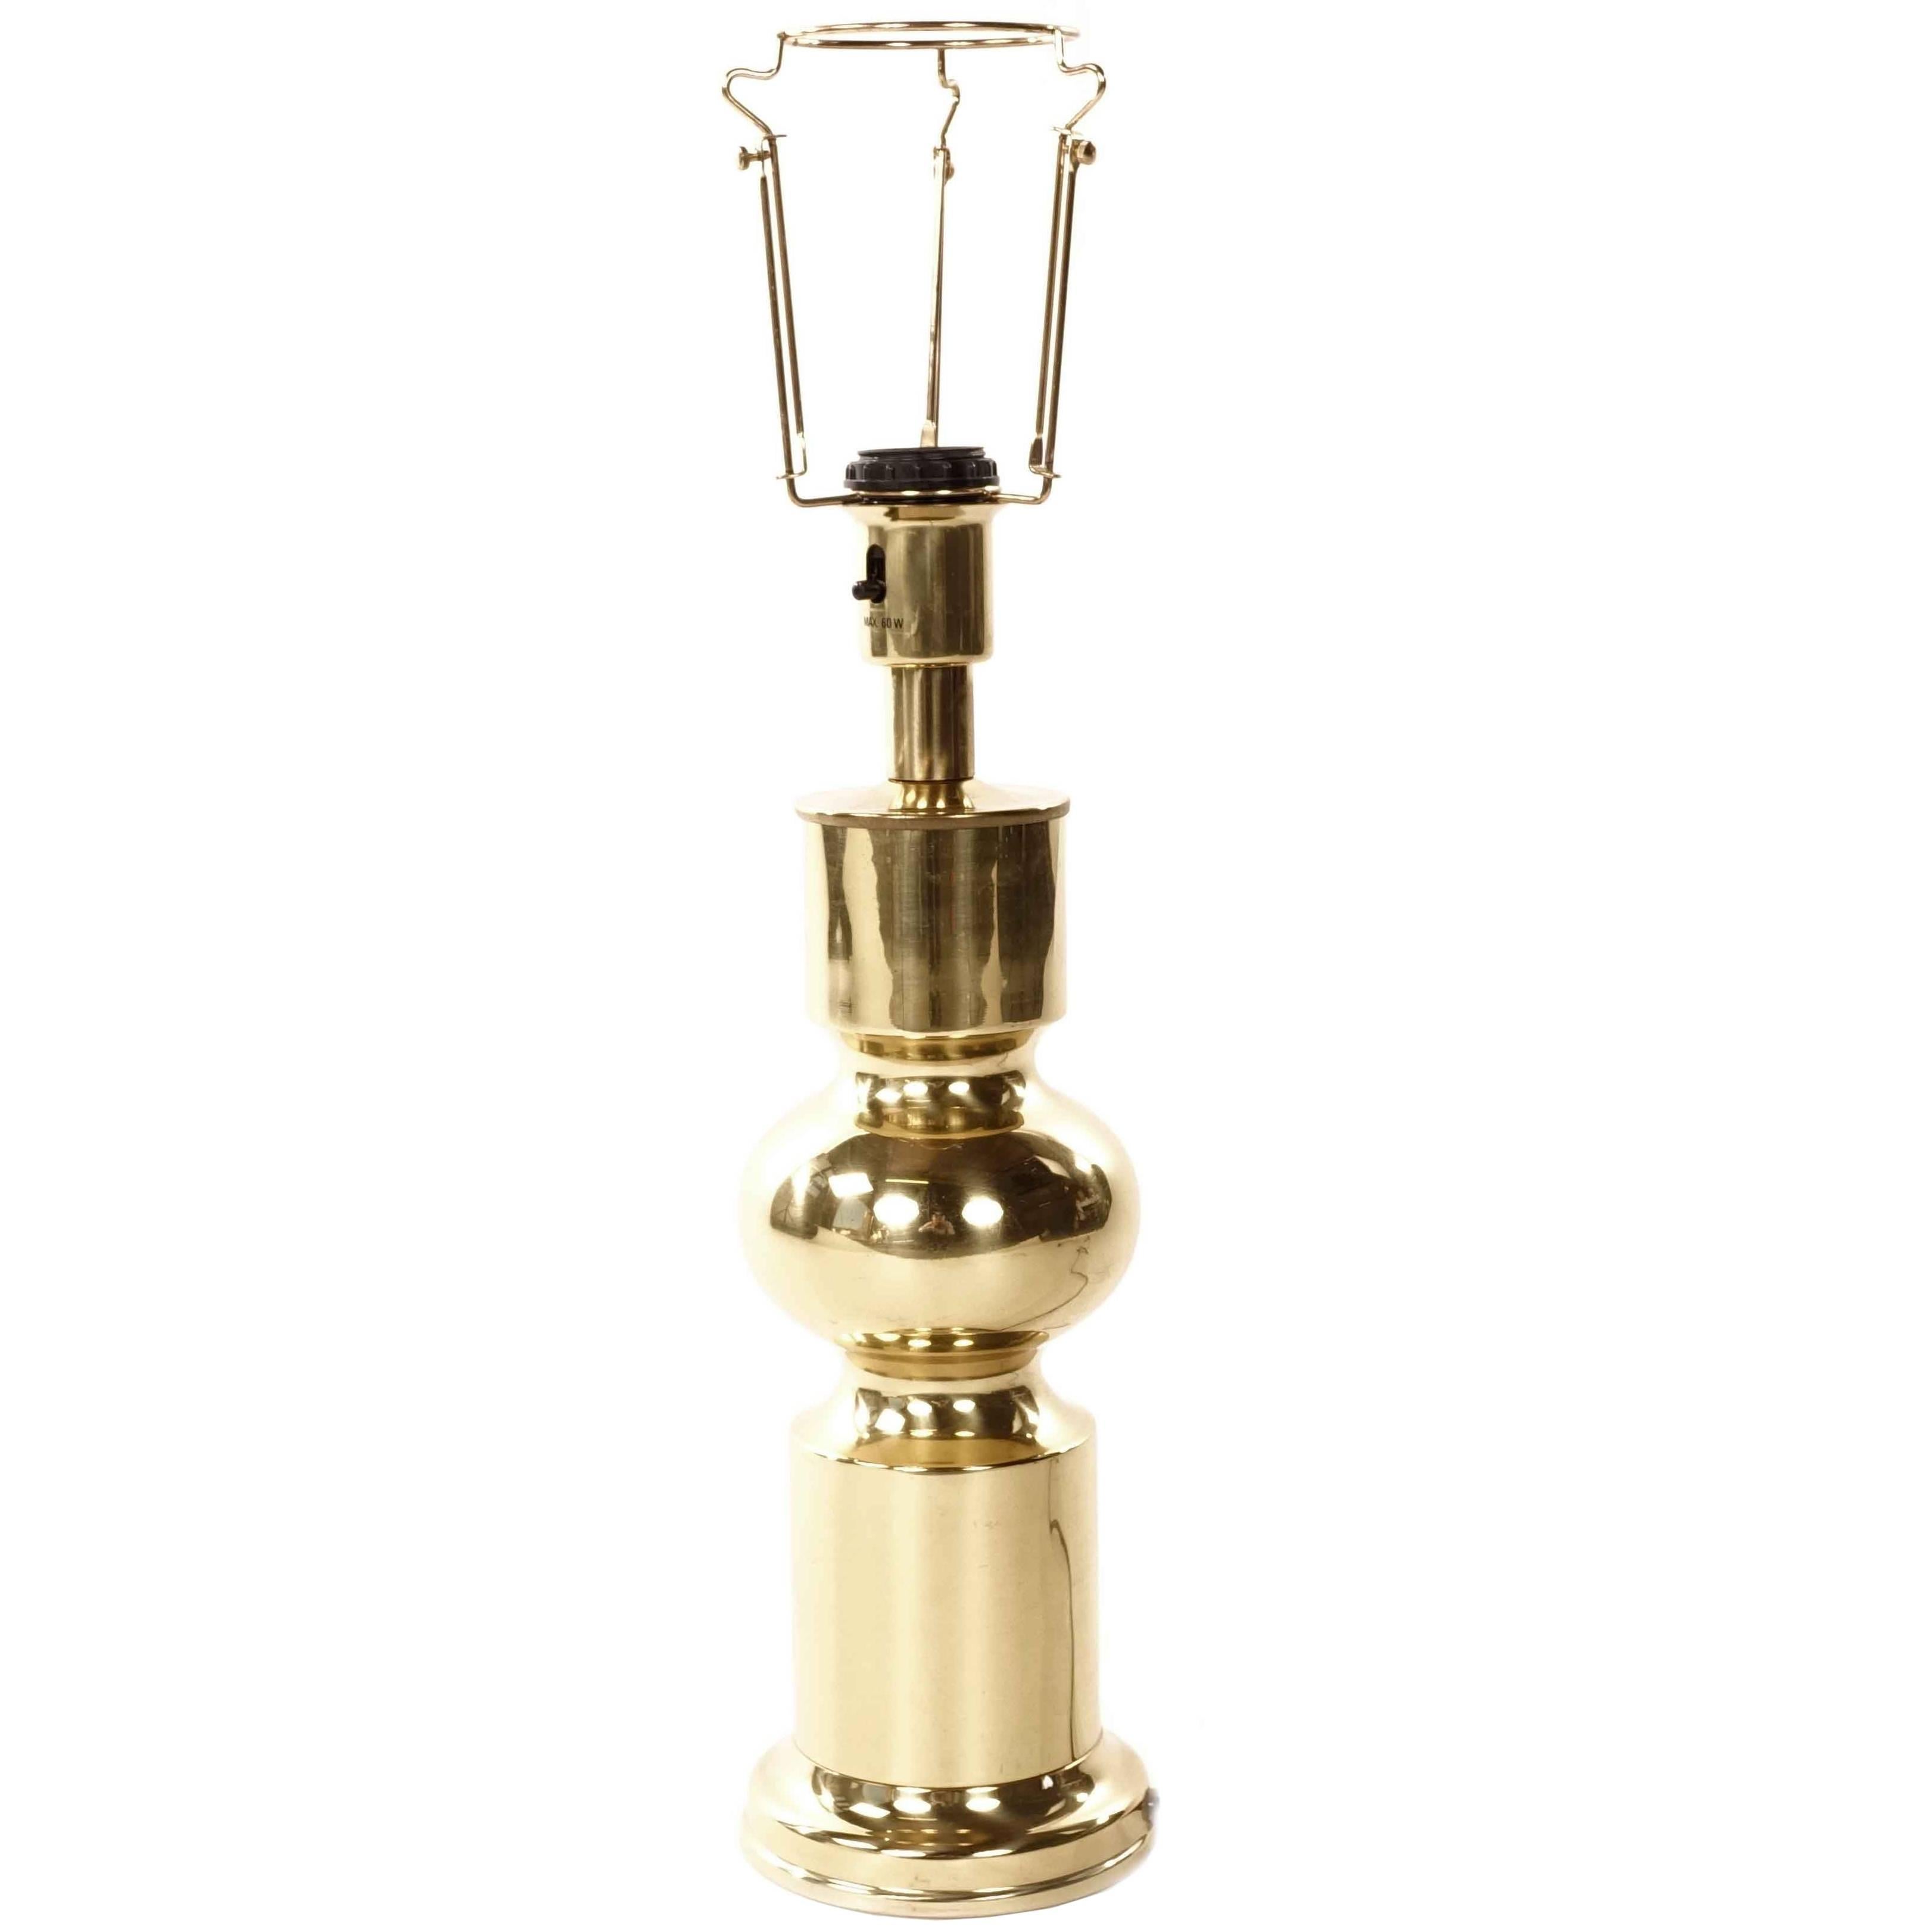 Table Lamp from Sweden in Brass Early 1900s "Aneta 18433"